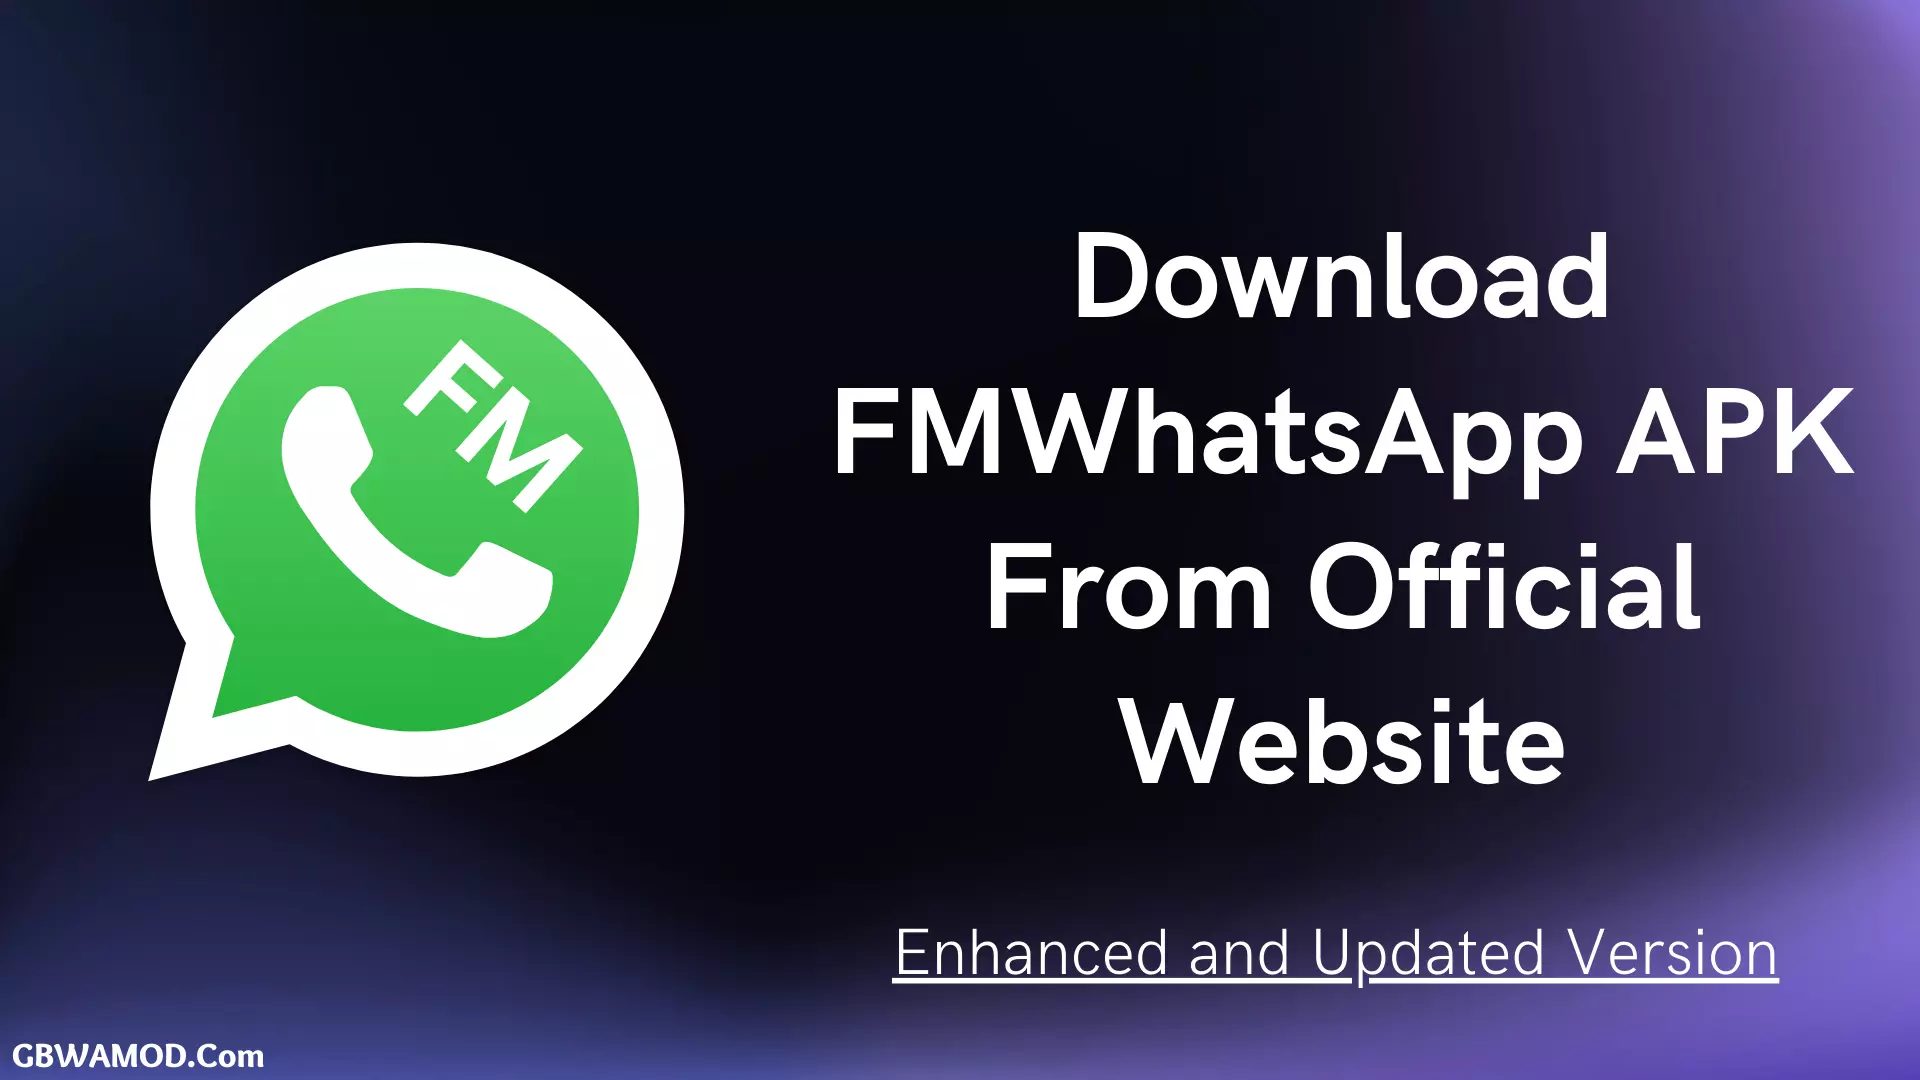 Download FMWhatsApp APK from here